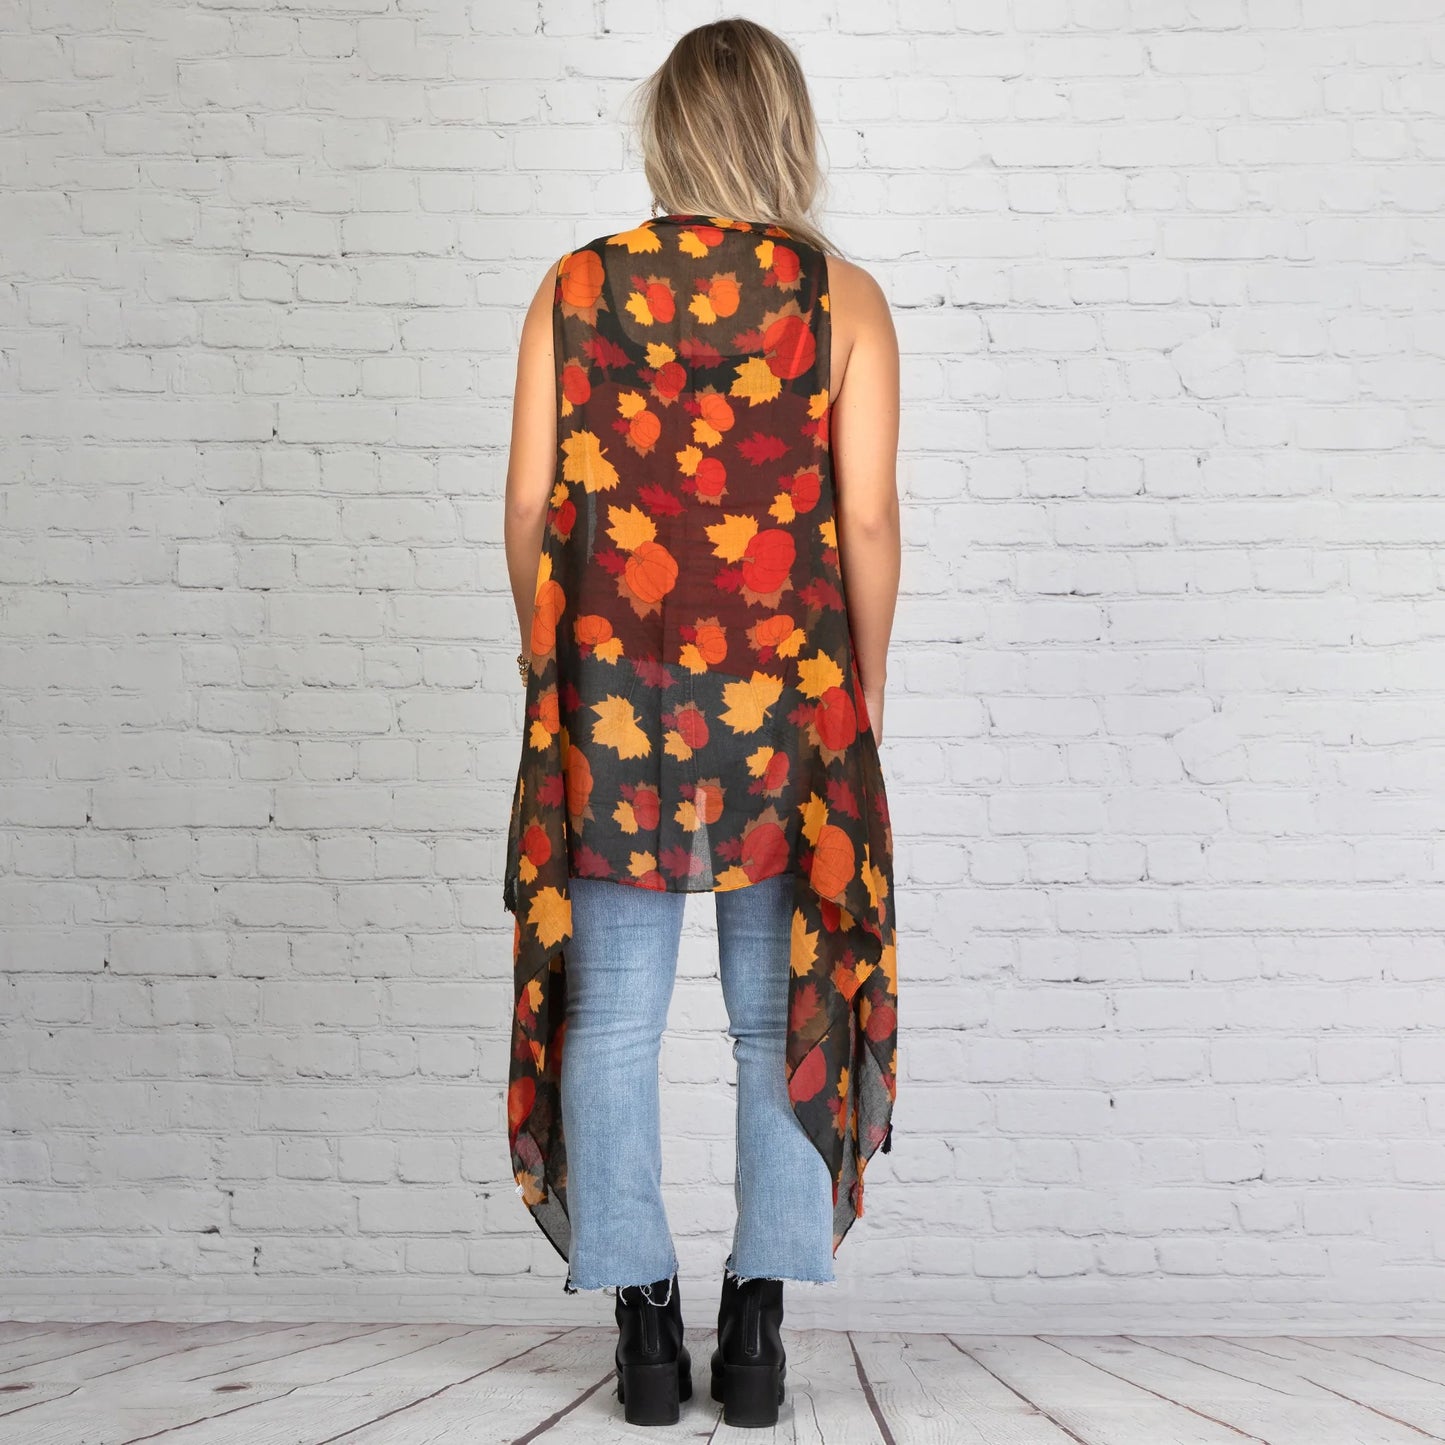 FALLING FOR FALL FESTIVE VEST ORANGE - One Size Fits All